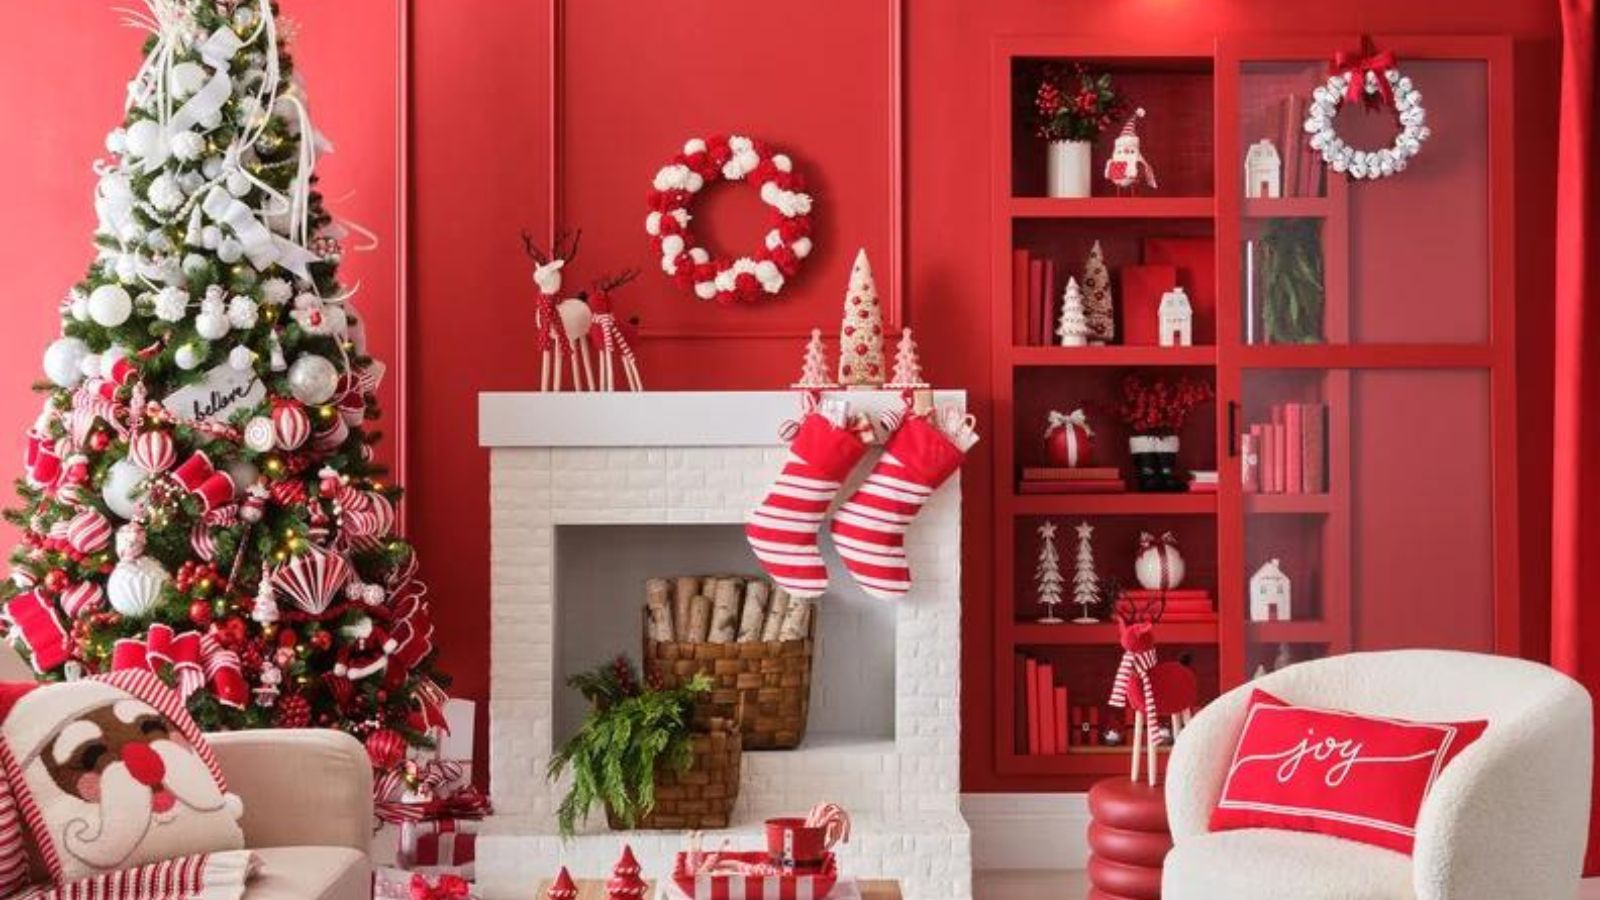 After Christmas Clearance Sales – Save Up To 70% at Michaels, Home